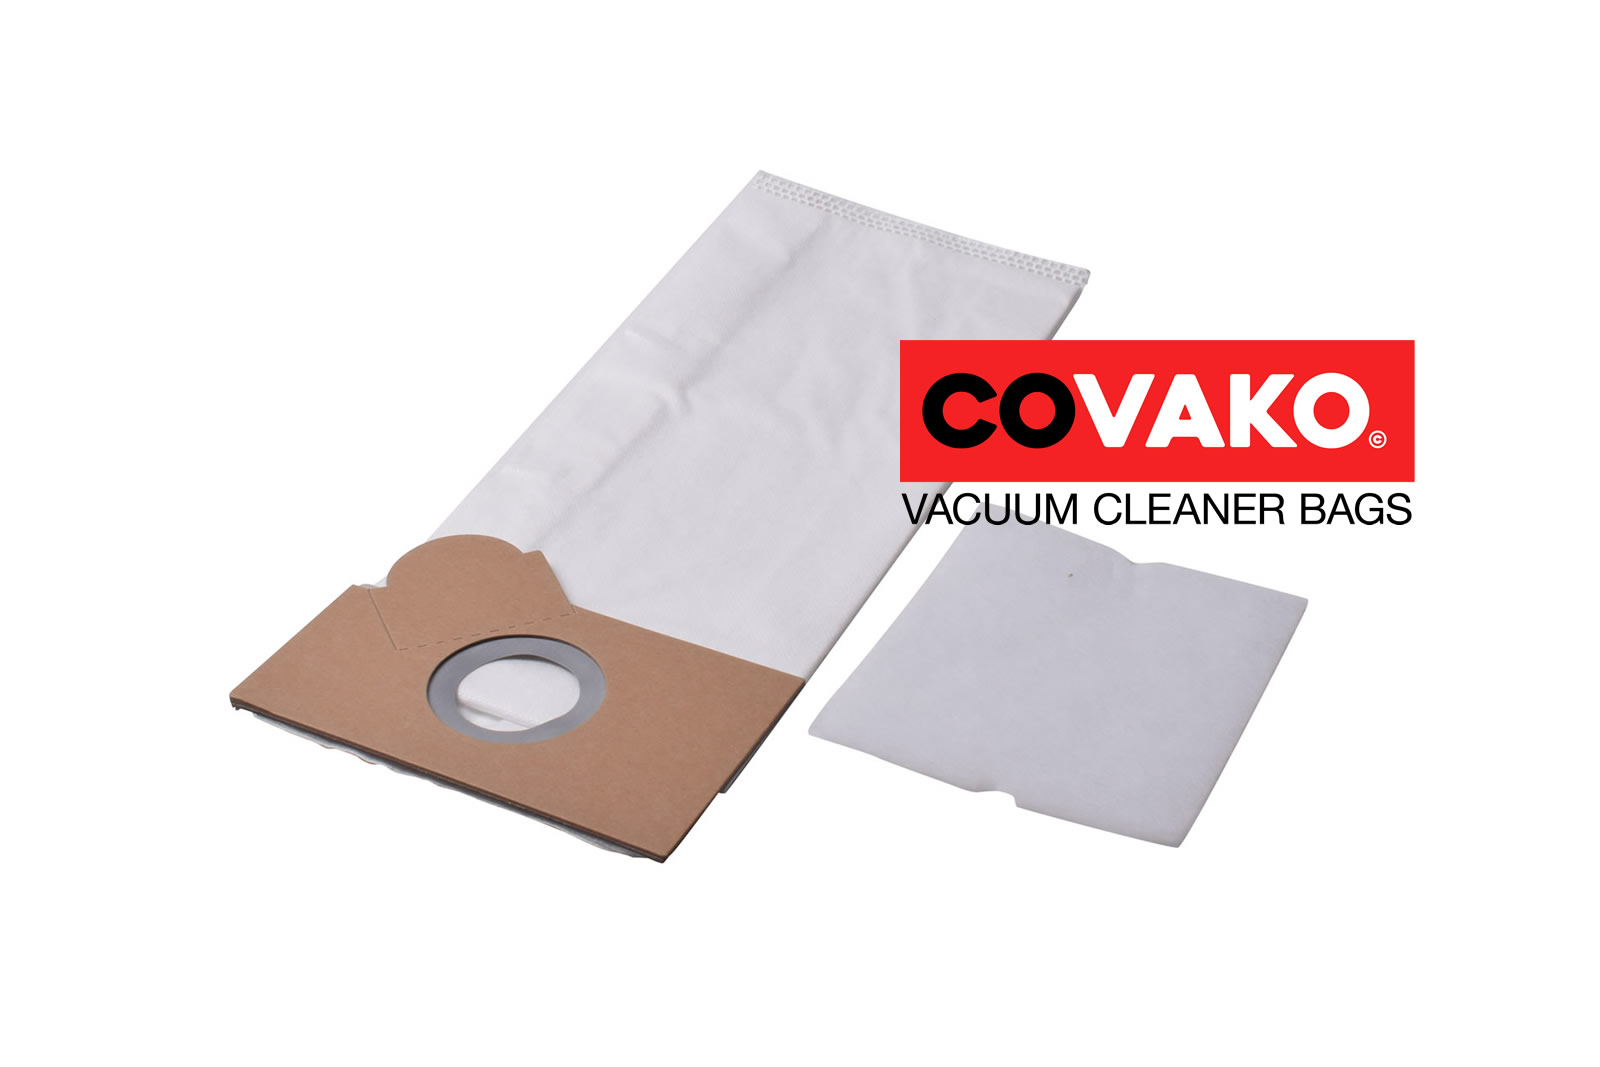 Fakir RS 17 A-60 / Synthesis - Fakir vacuum cleaner bags